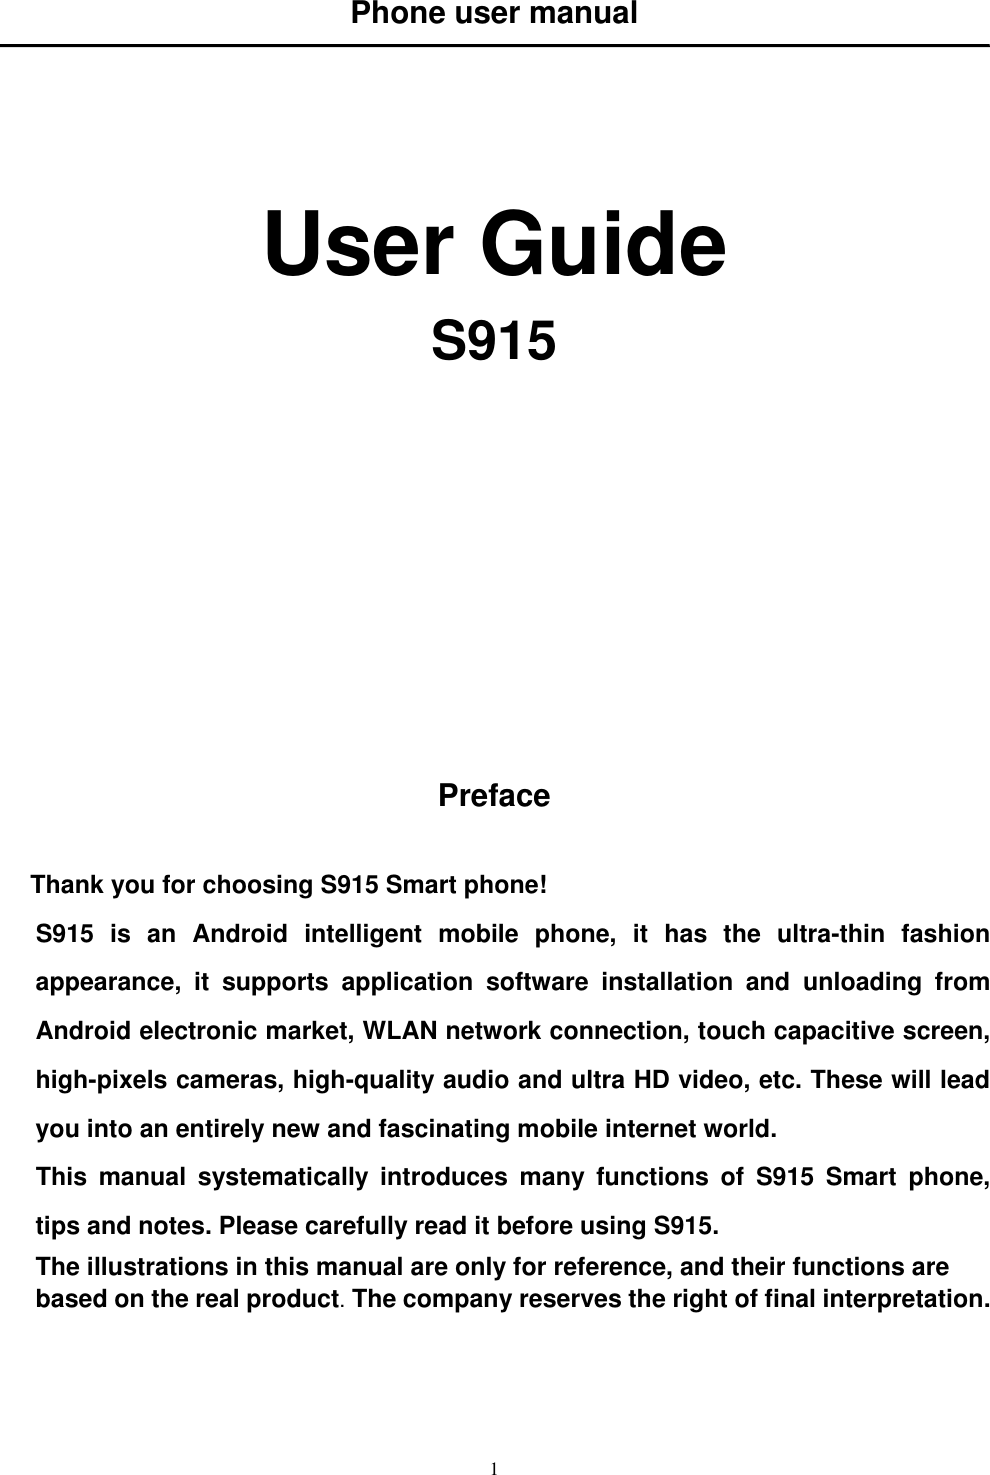   1 Phone user manual      User Guide S915             Preface  Thank you for choosing S915 Smart phone! S915  is  an  Android  intelligent  mobile  phone,  it  has  the  ultra-thin  fashion appearance,  it  supports  application  software  installation  and  unloading  from Android electronic market, WLAN network connection, touch capacitive screen, high-pixels cameras, high-quality audio and ultra HD video, etc. These will lead you into an entirely new and fascinating mobile internet world. This  manual  systematically  introduces  many  functions  of  S915  Smart  phone, tips and notes. Please carefully read it before using S915.   The illustrations in this manual are only for reference, and their functions are based on the real product. The company reserves the right of final interpretation.   